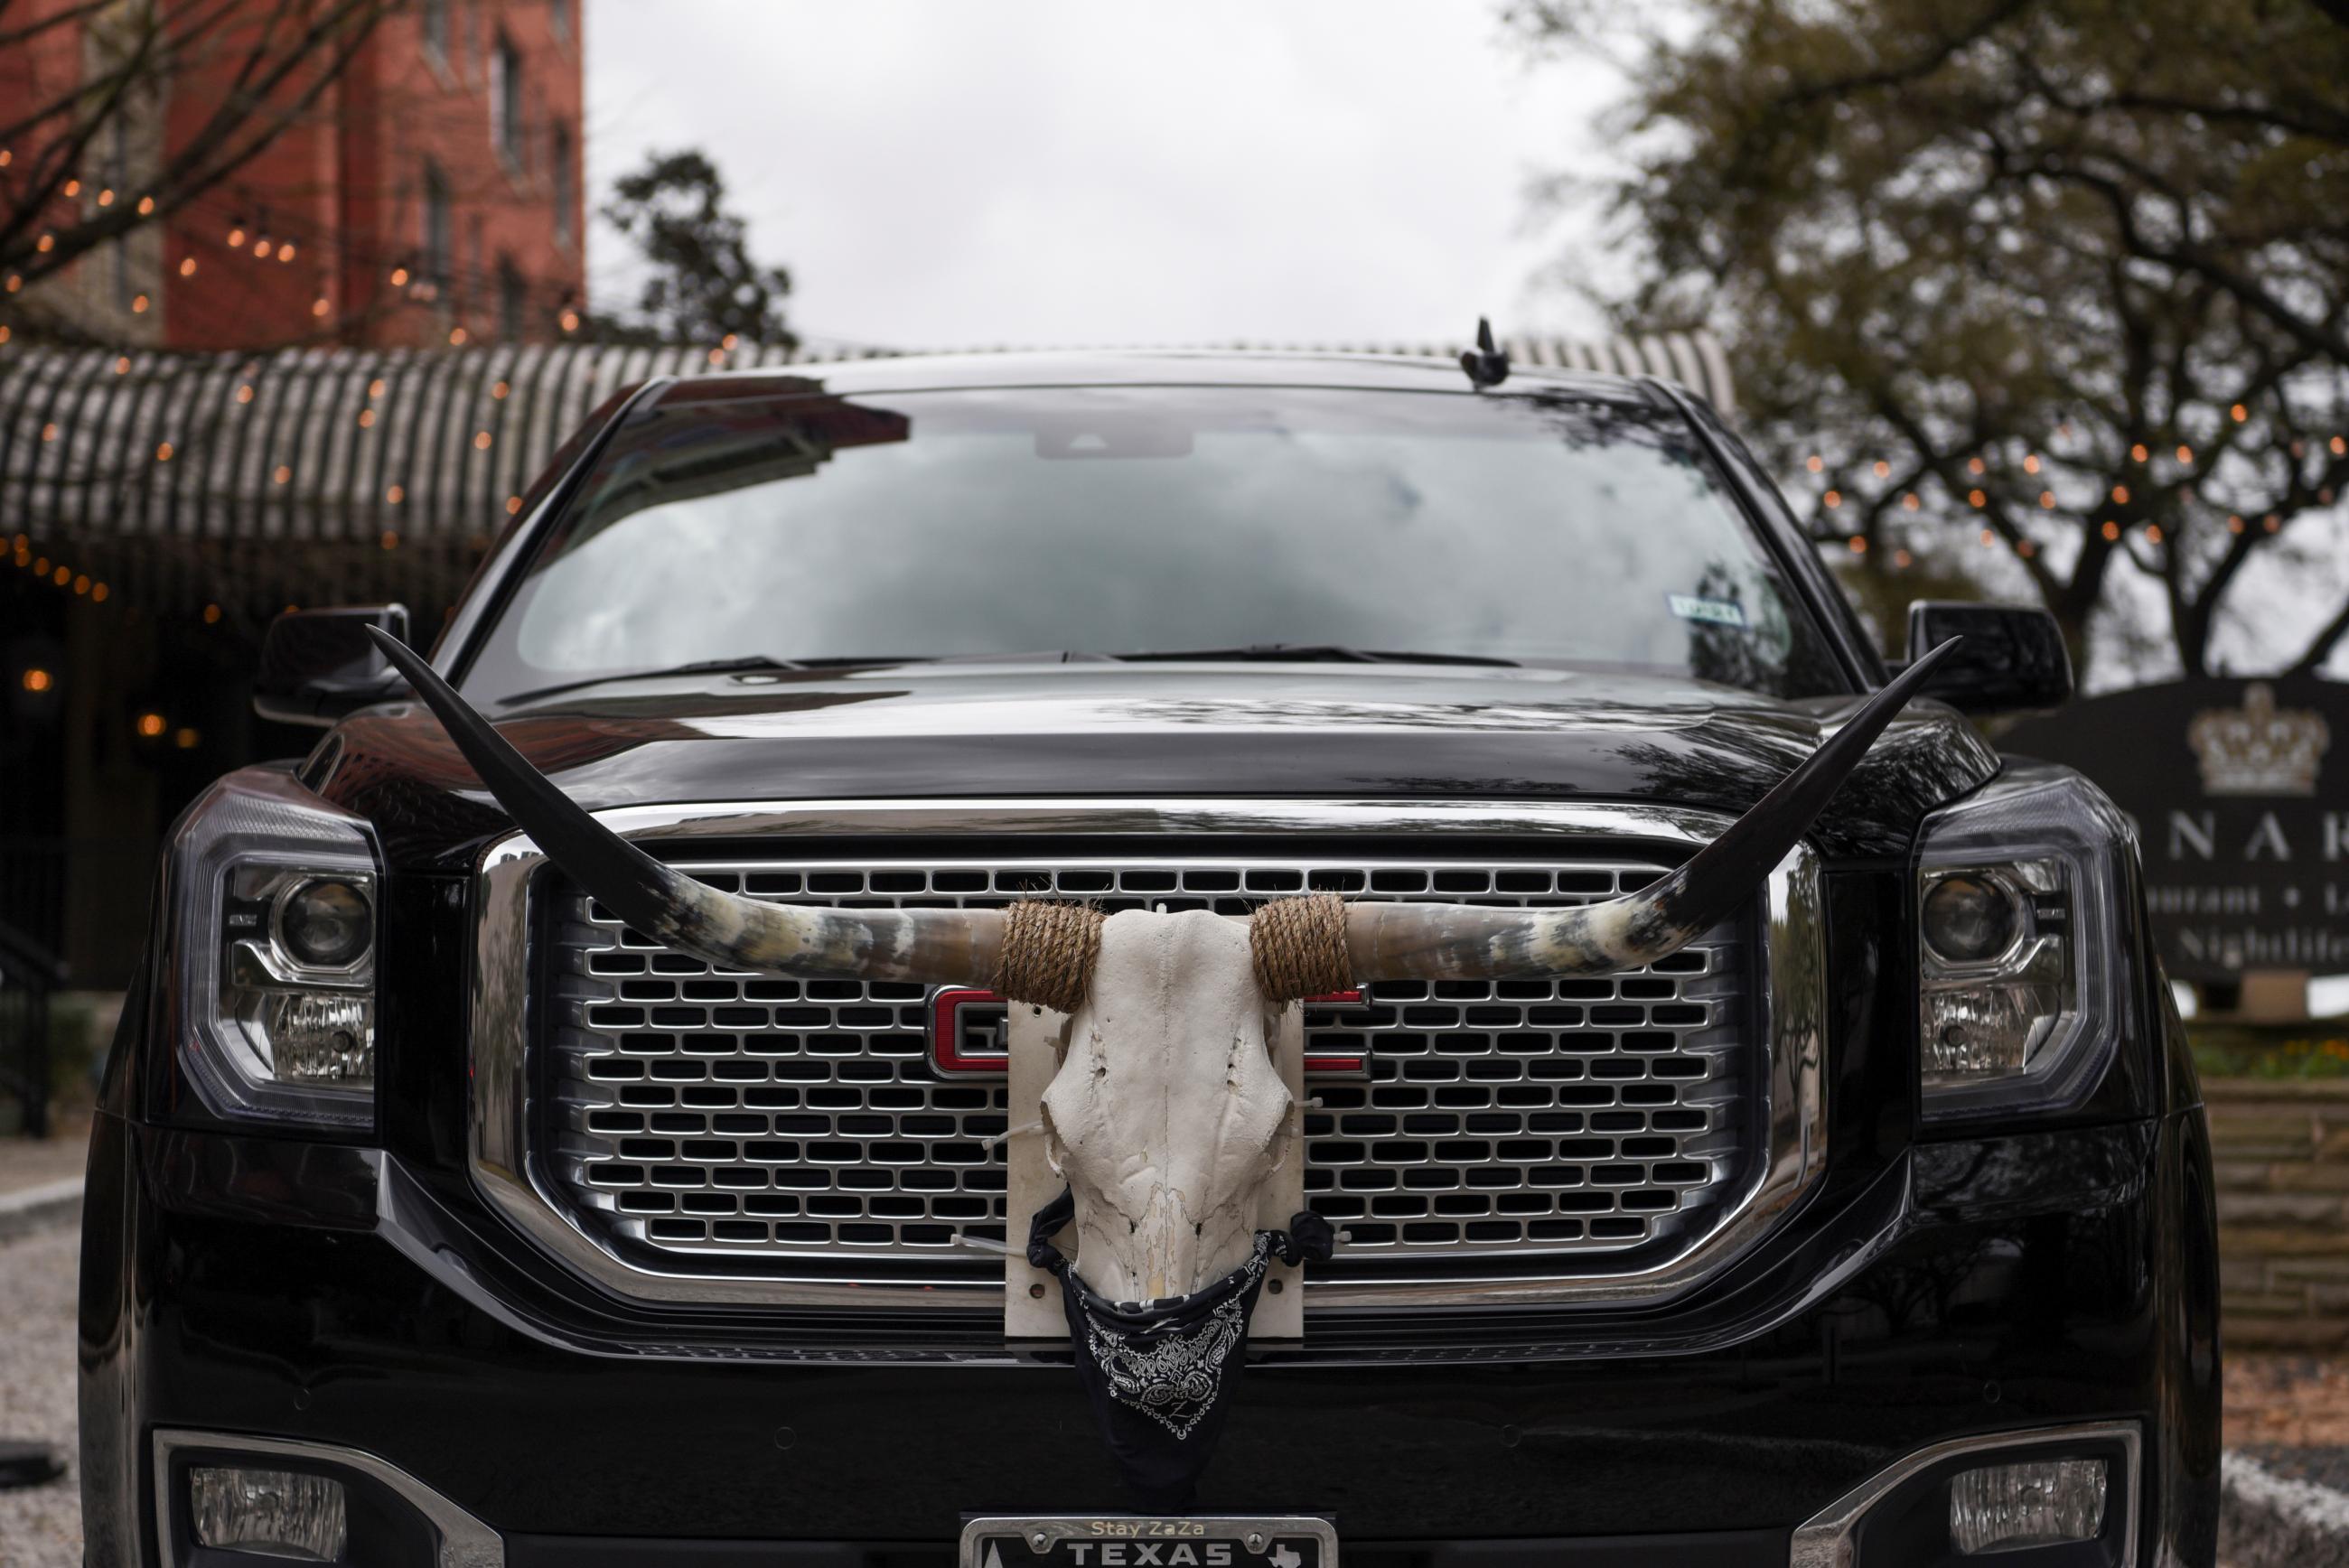 A longhorn skull mounted to a car remained masked as Texas lifted its mask mandate and allowed businesses to reopen at full capacity during the COVID pandemic in Houston, Texas, on March 10, 2021. 